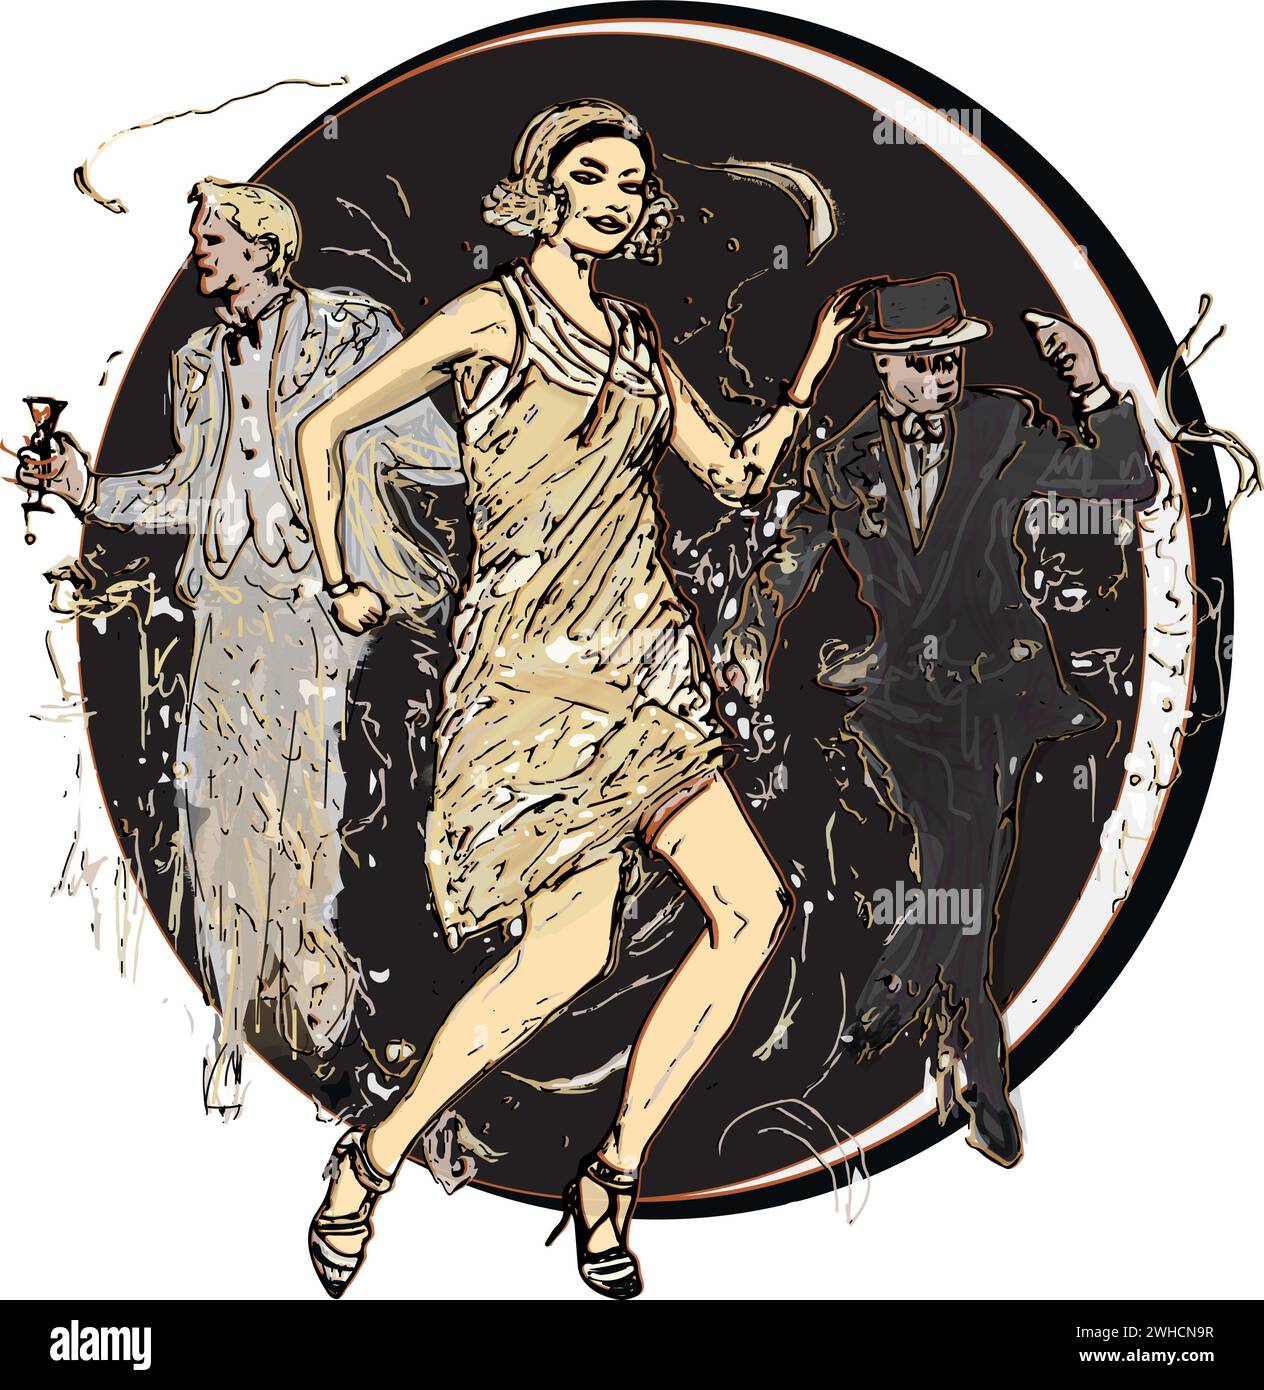 Illustration of a 1920s art deco party with woman in flapper dress dancing and men in suits- crescent moon background. Stock Vector